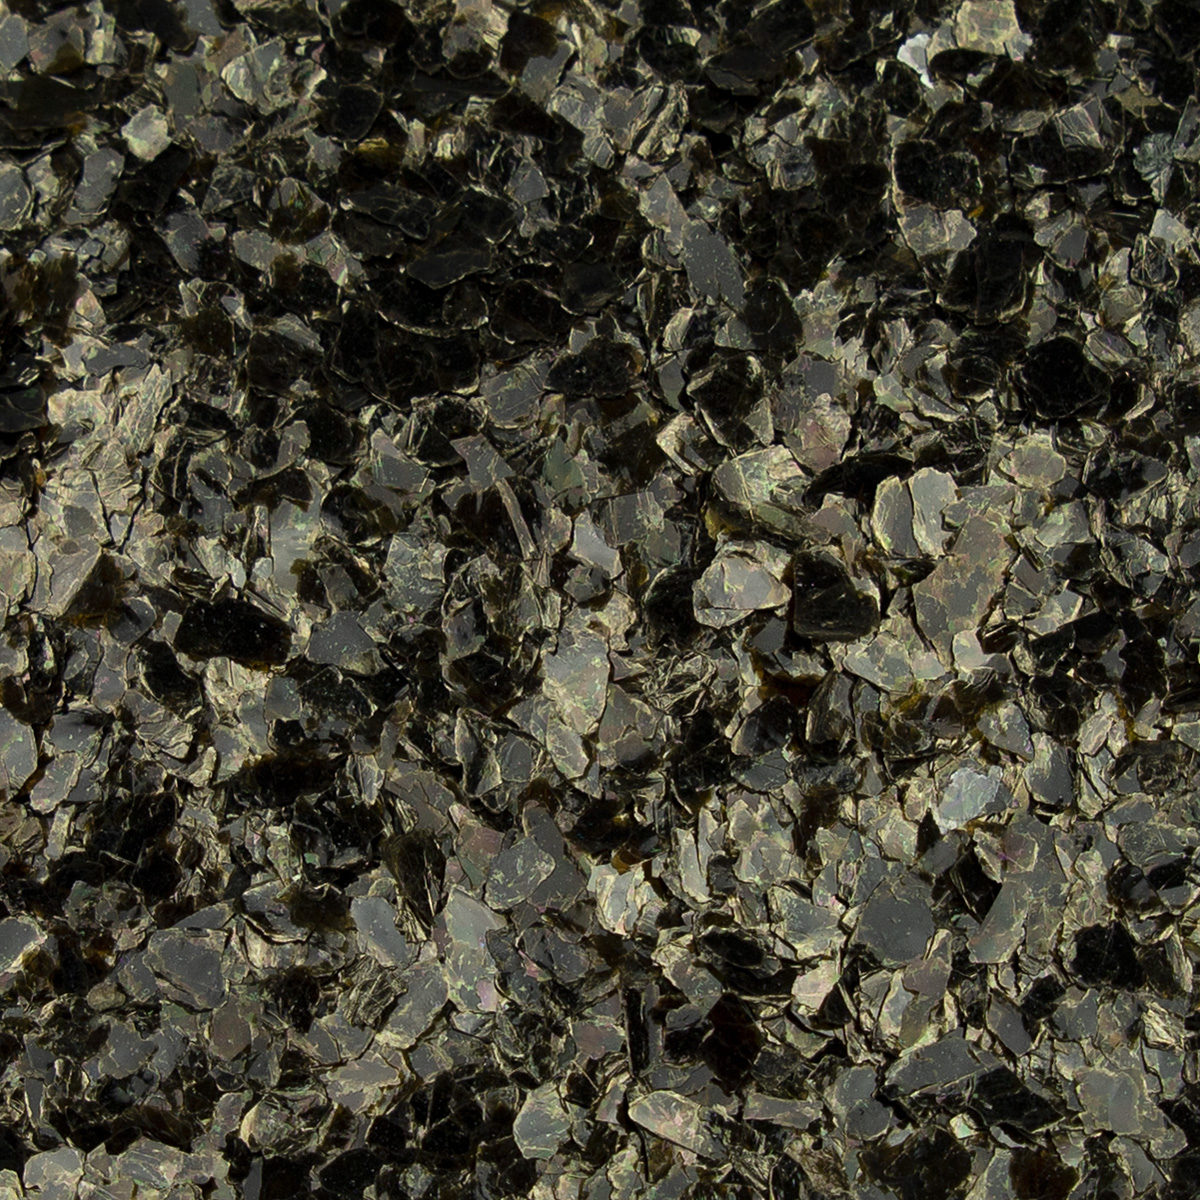 [BLOWOUT] Pure Metallic Naturals MIDNIGHT Mica Flakes 1/4'' - 2oz wt. (12oz by volume)